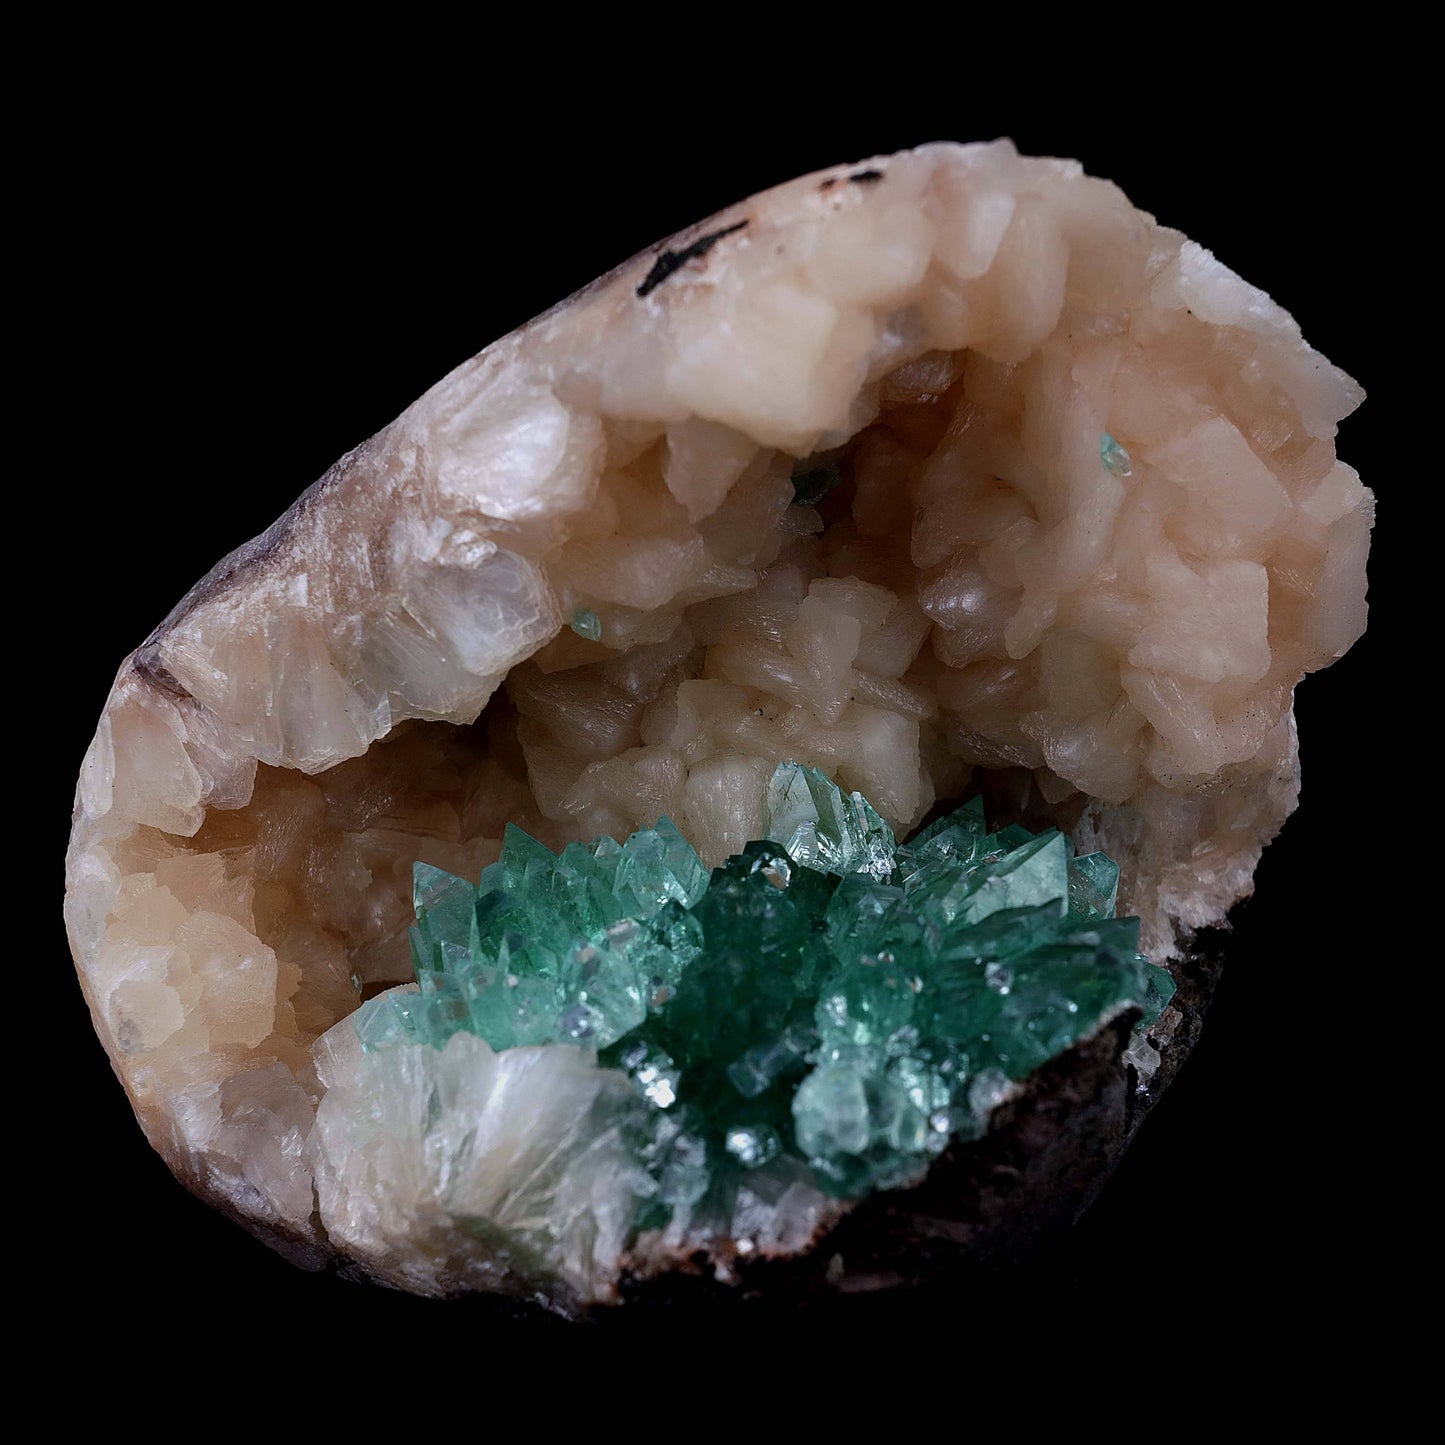 Green Apophyllite with Stilbite Natural Mineral Specimen # B 3986  https://www.superbminerals.us/products/green-apophyllite-with-stilbite-natural-mineral-specimen-b-3986  Features Transparent green apophyllite crystals up to 10-15 mm long with lustrous crystal faces and steep pyramidal terminations, on matrix covered with lustrous peach-baggie colored Stilbite crystals up to mixed size. Primary Mineral(s):&nbsp; Apophyllite Secondary Mineral(s): Stilbite